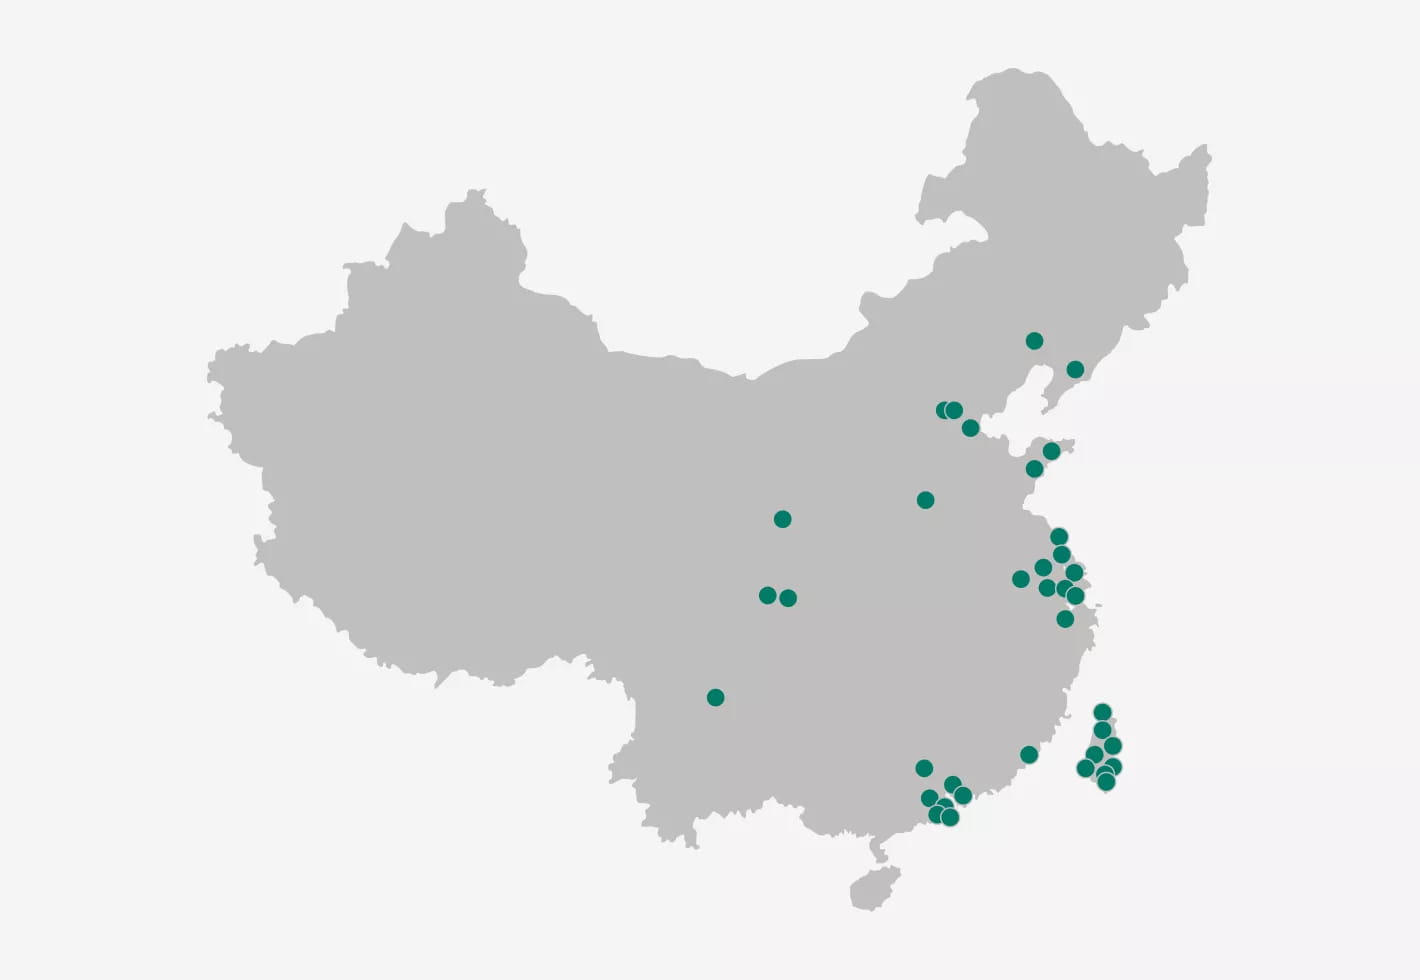 Our presence in China